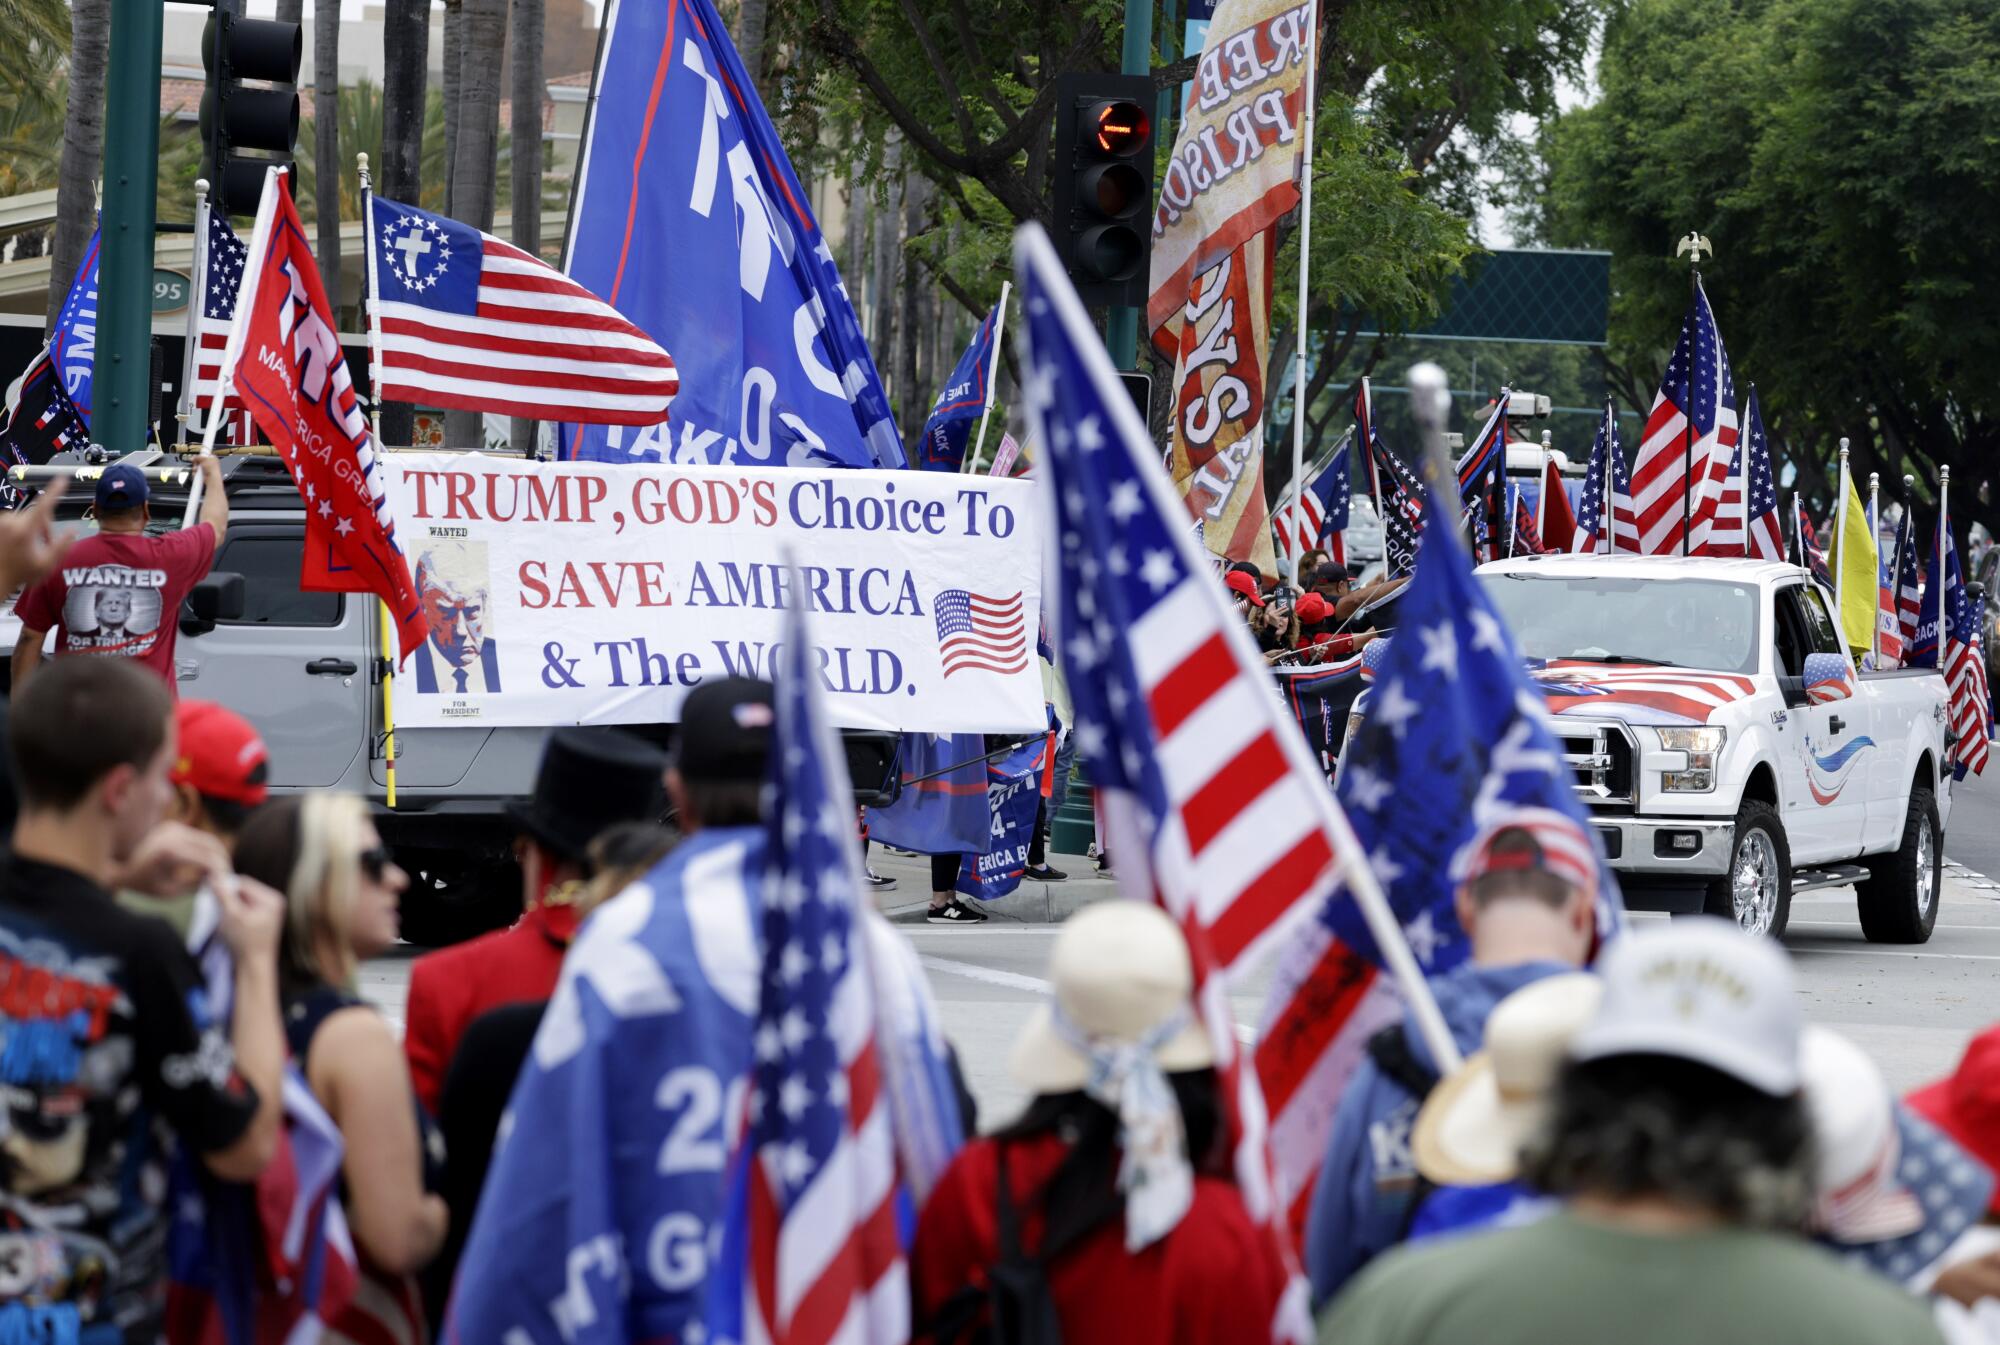 Supporters of former President Trump gathered outside the site for the California Republican Convention in Anaheim.